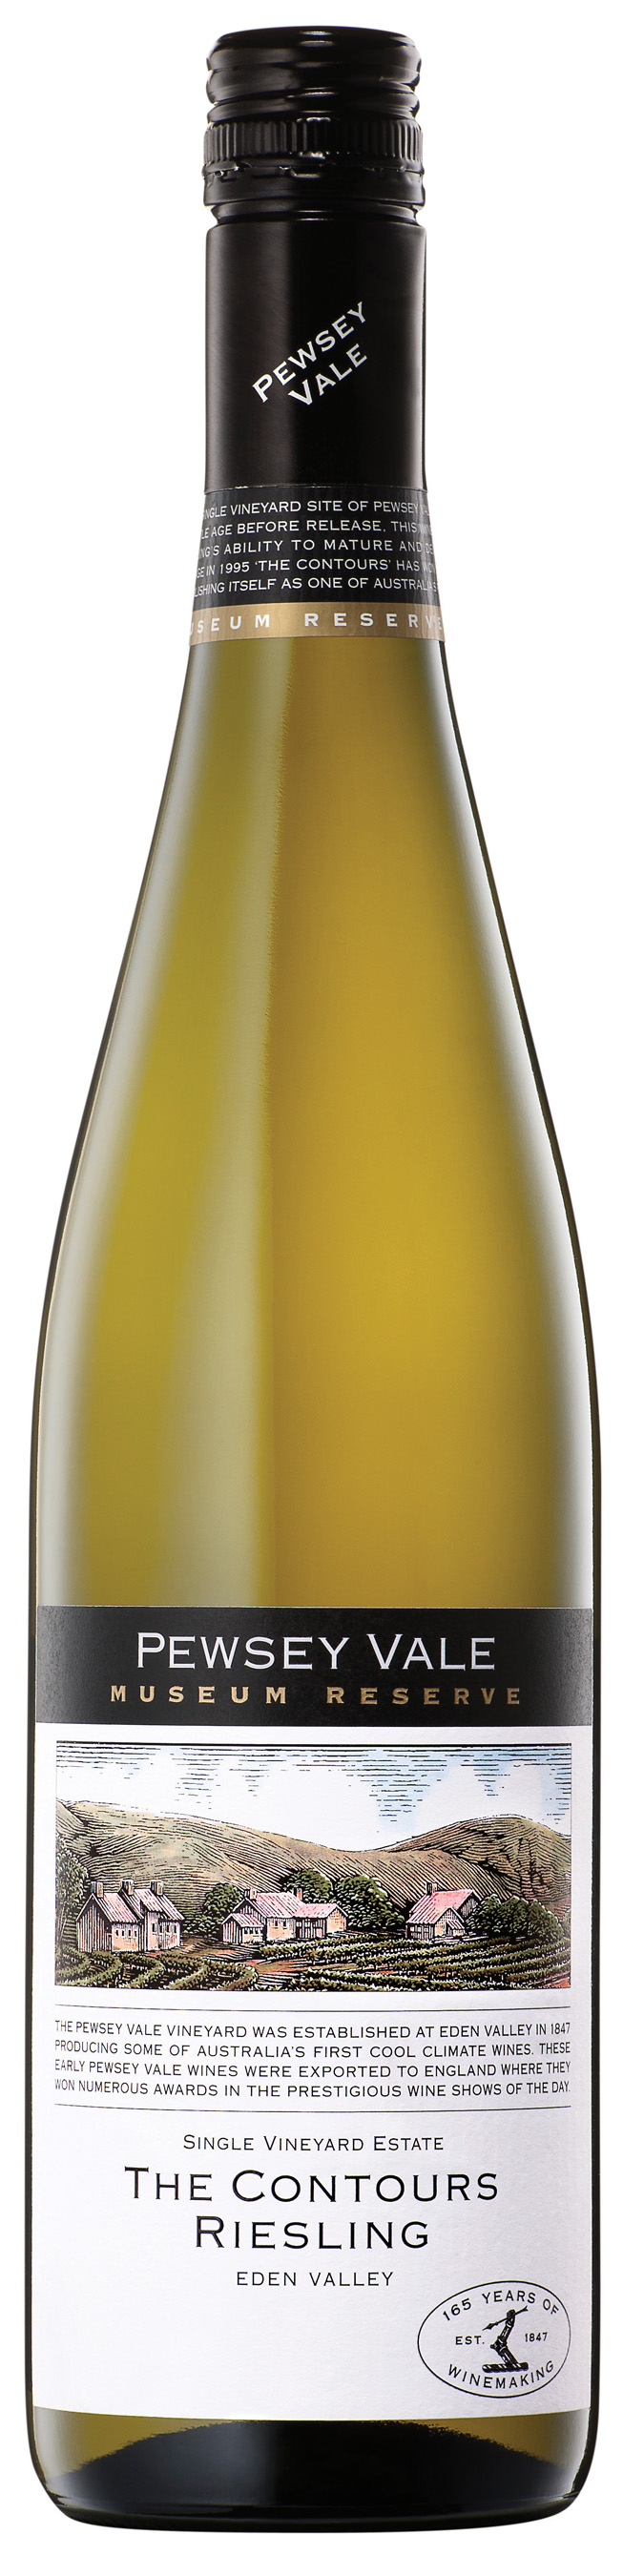 2015 Pewsey Vale Vineyard The Contours Riesling Eden Valley image